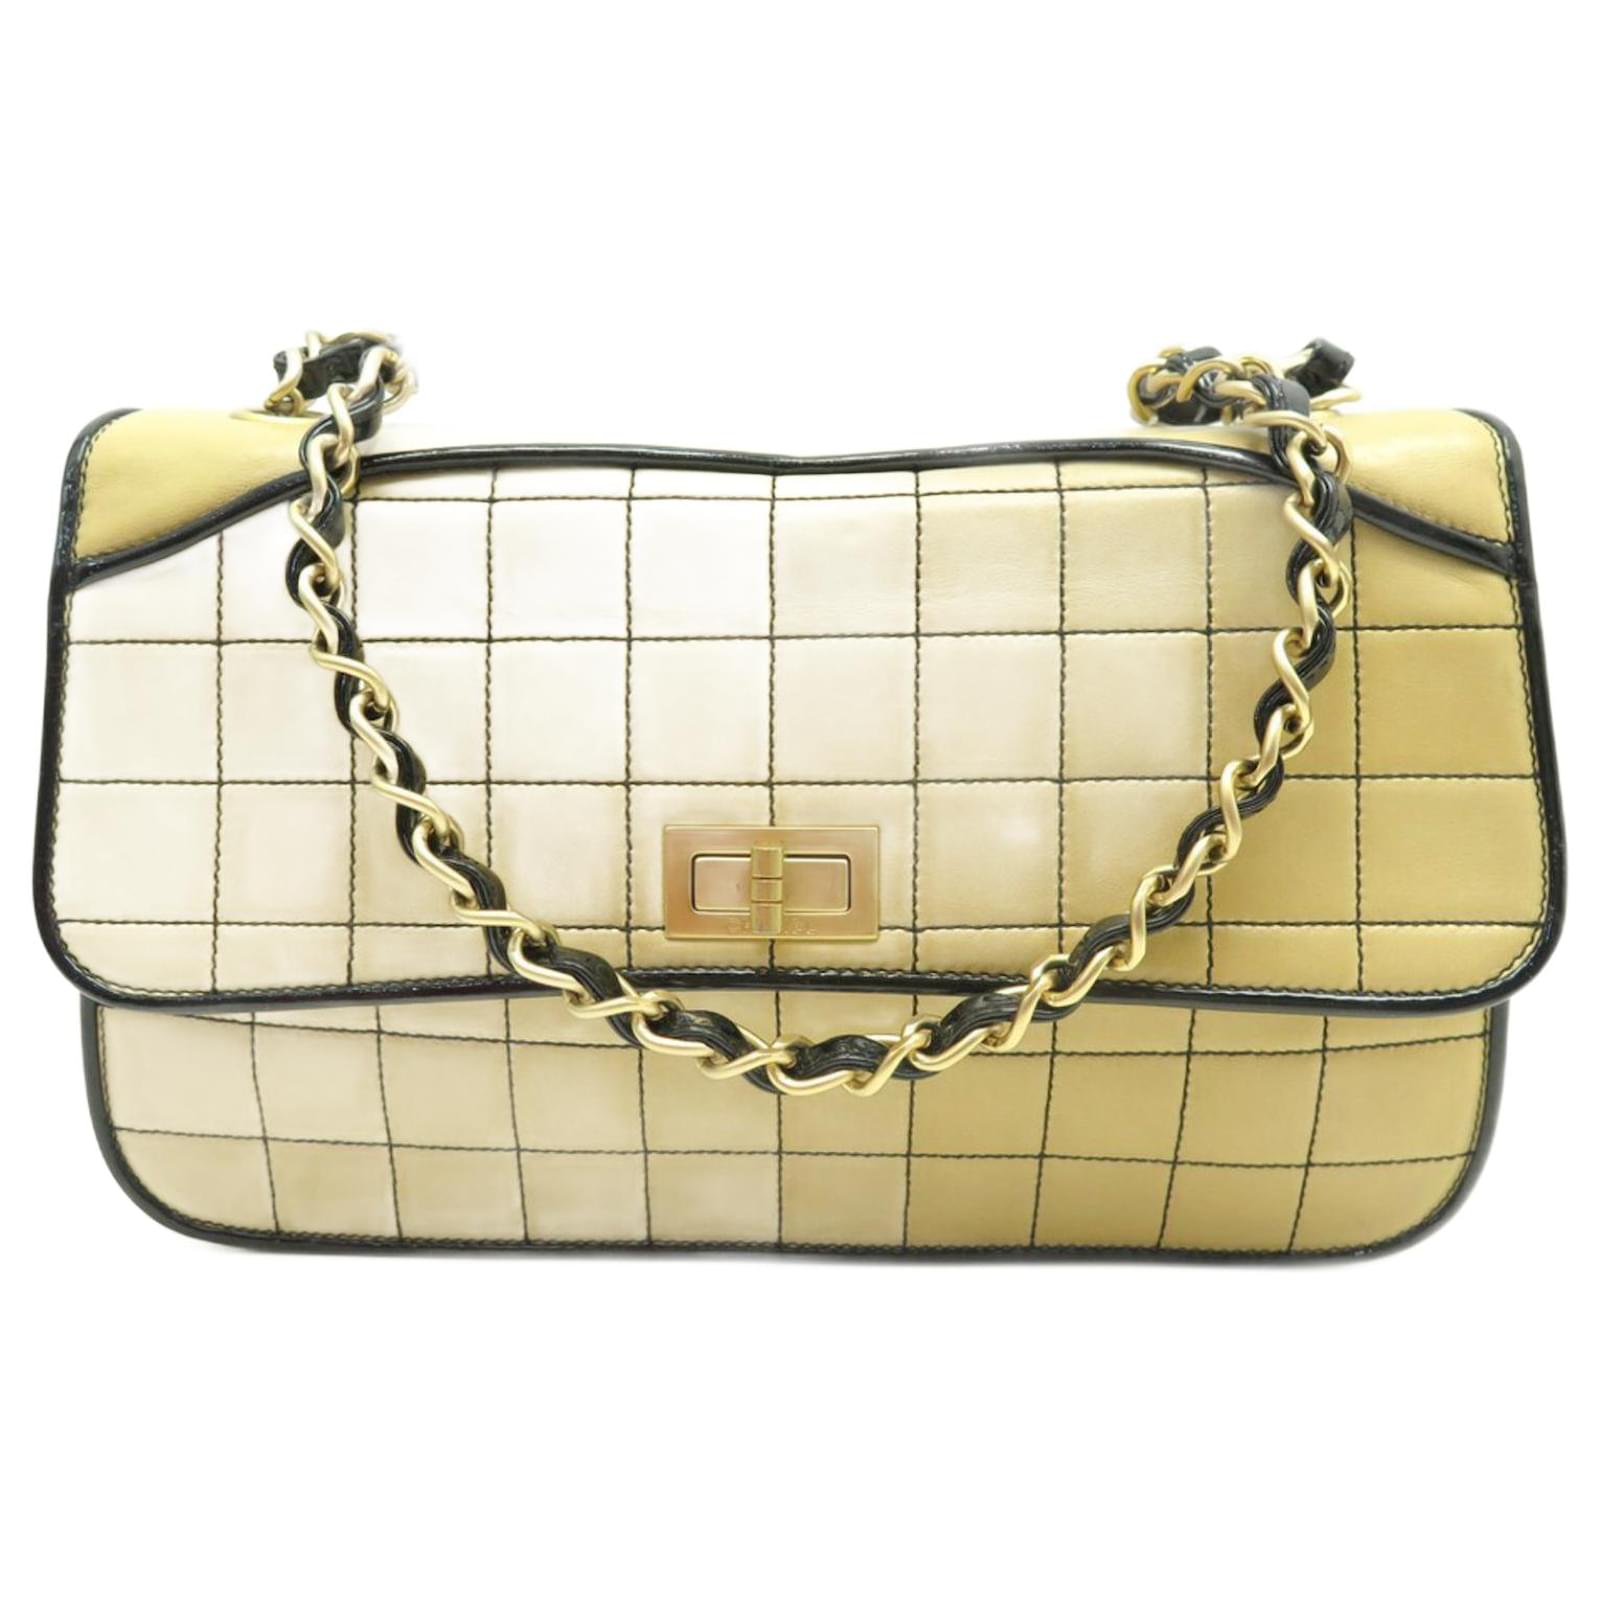 Vintage Chanel Chocolate Bar Flap Bag from 2000-2002